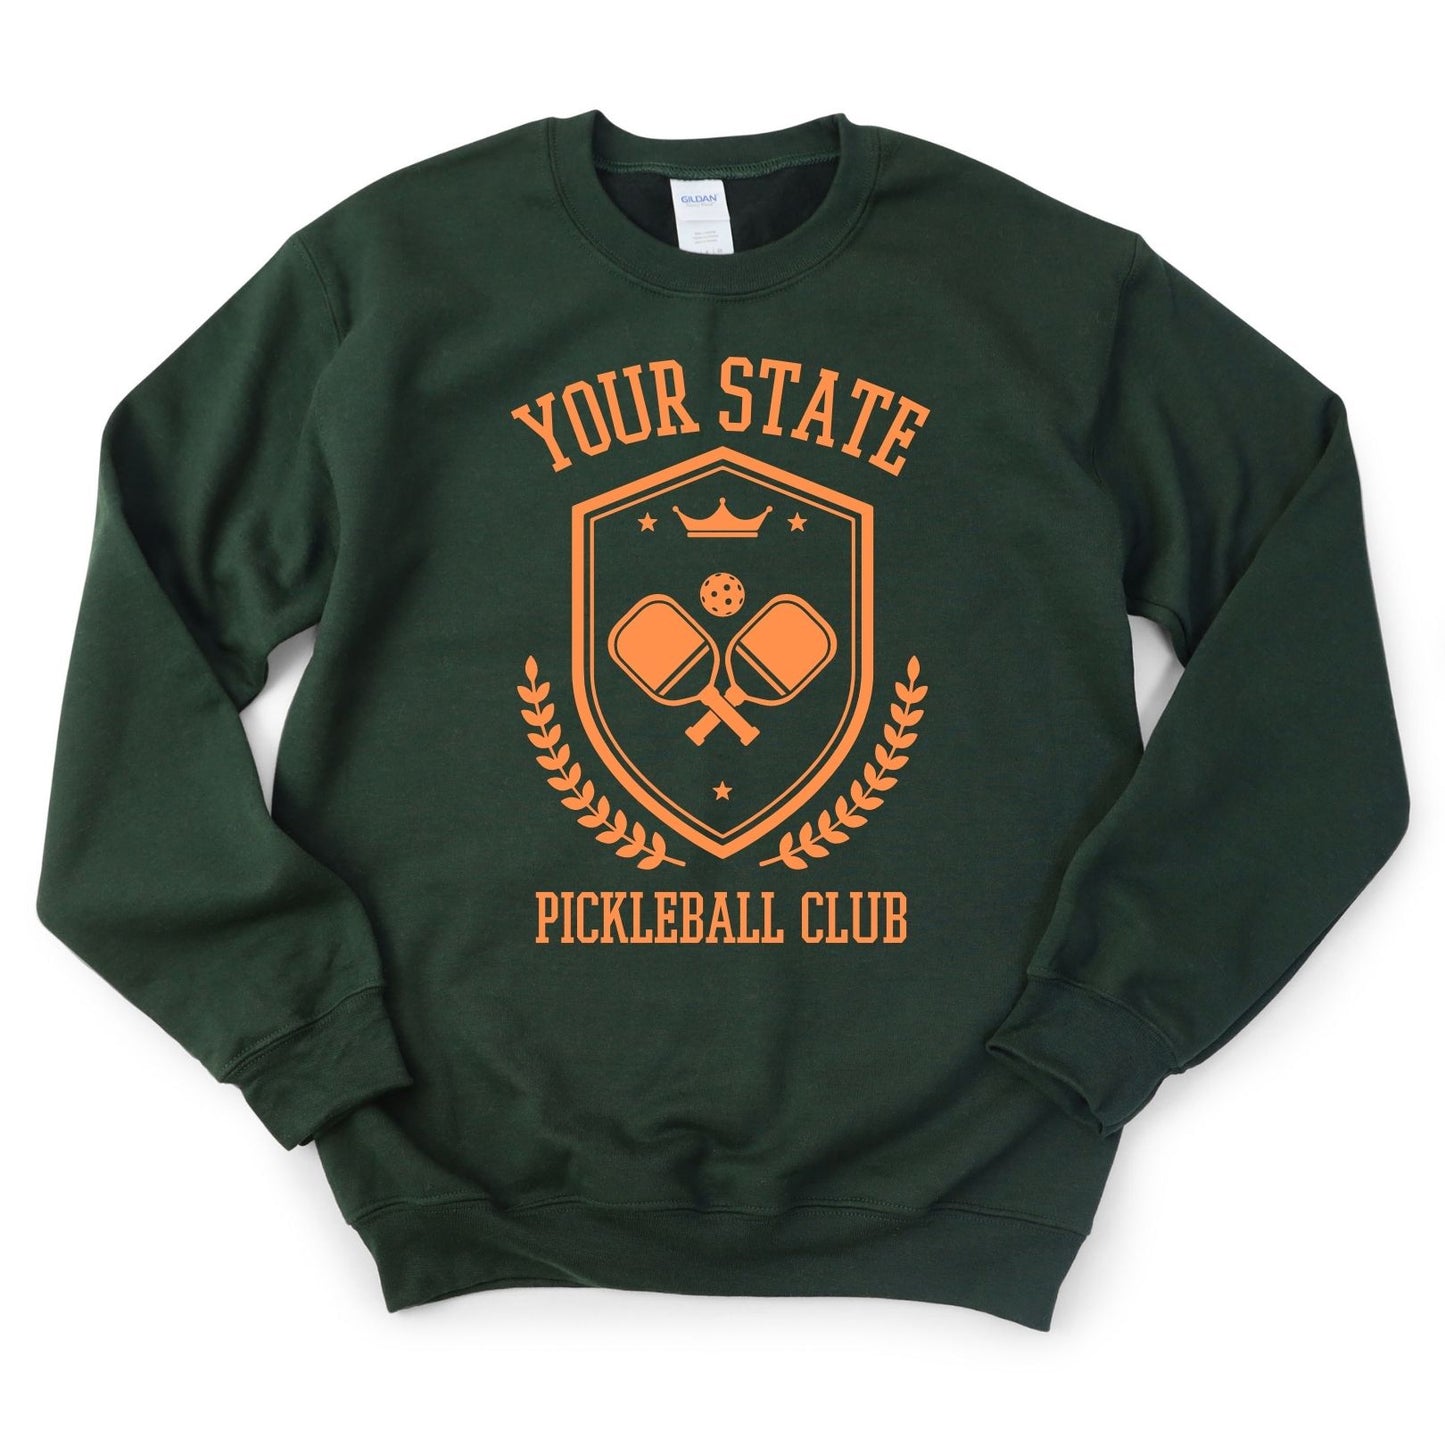 Pickleball Club Sweatshirt - Customize With Your State or City or Brand Name